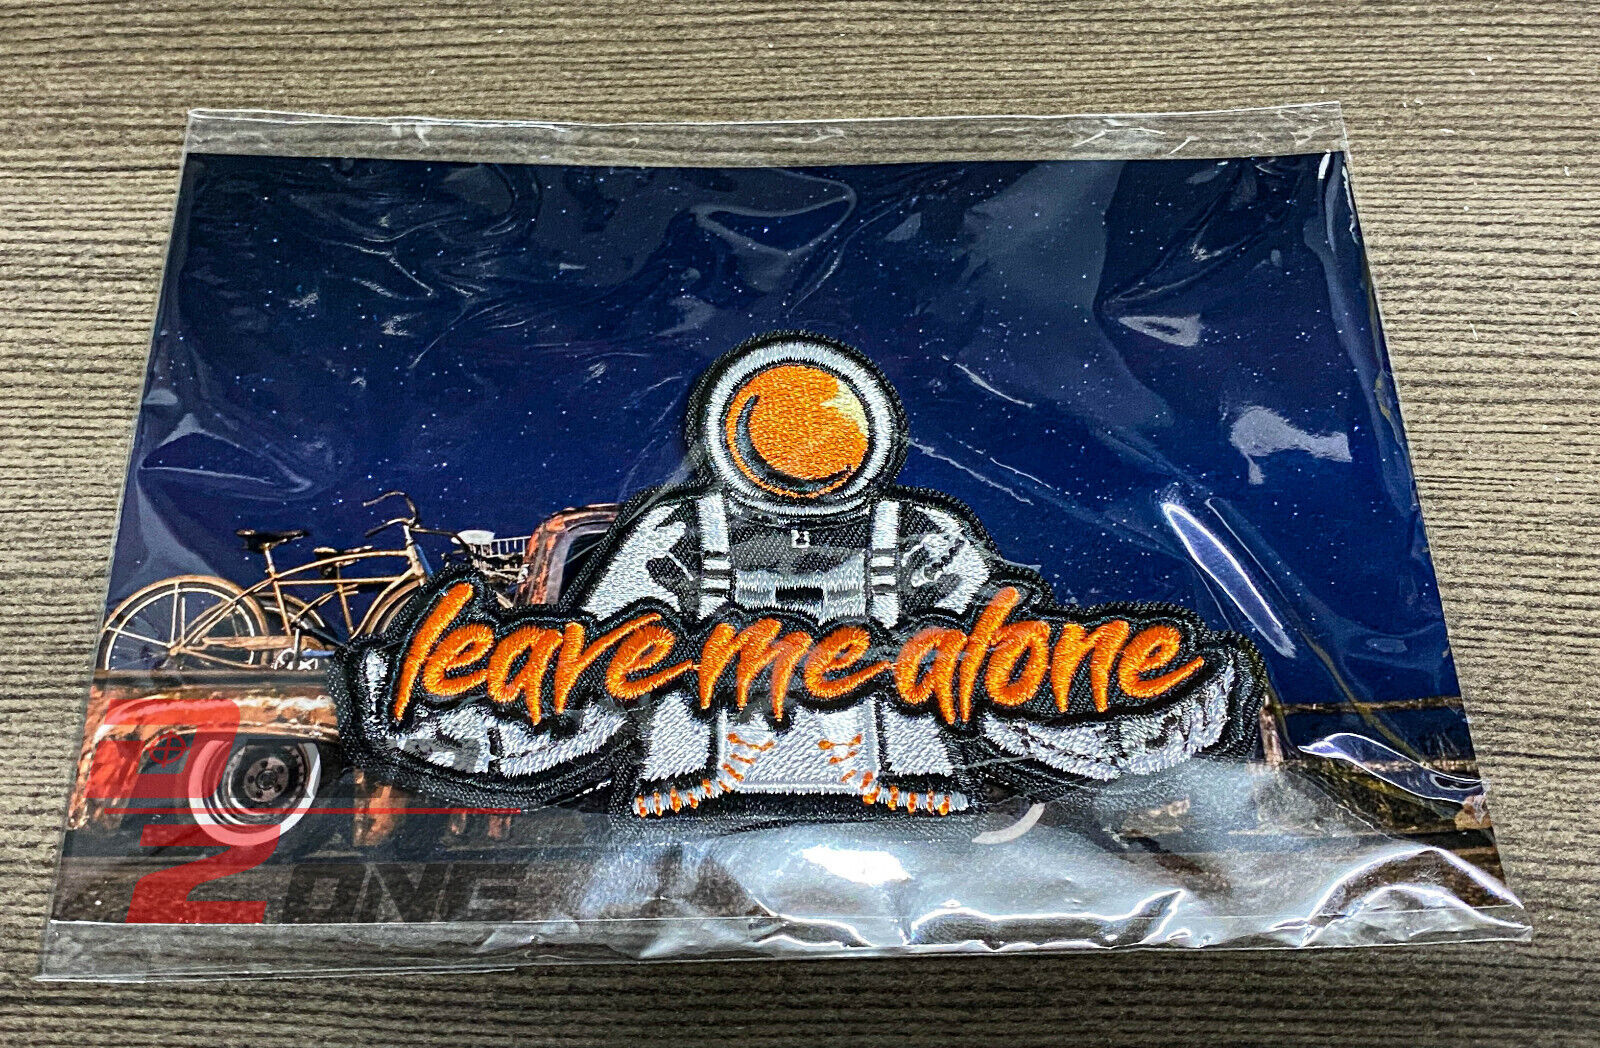 Questionable Morality Leave Me Alone LE Morale Patch QM Skull Astronaut LMA 